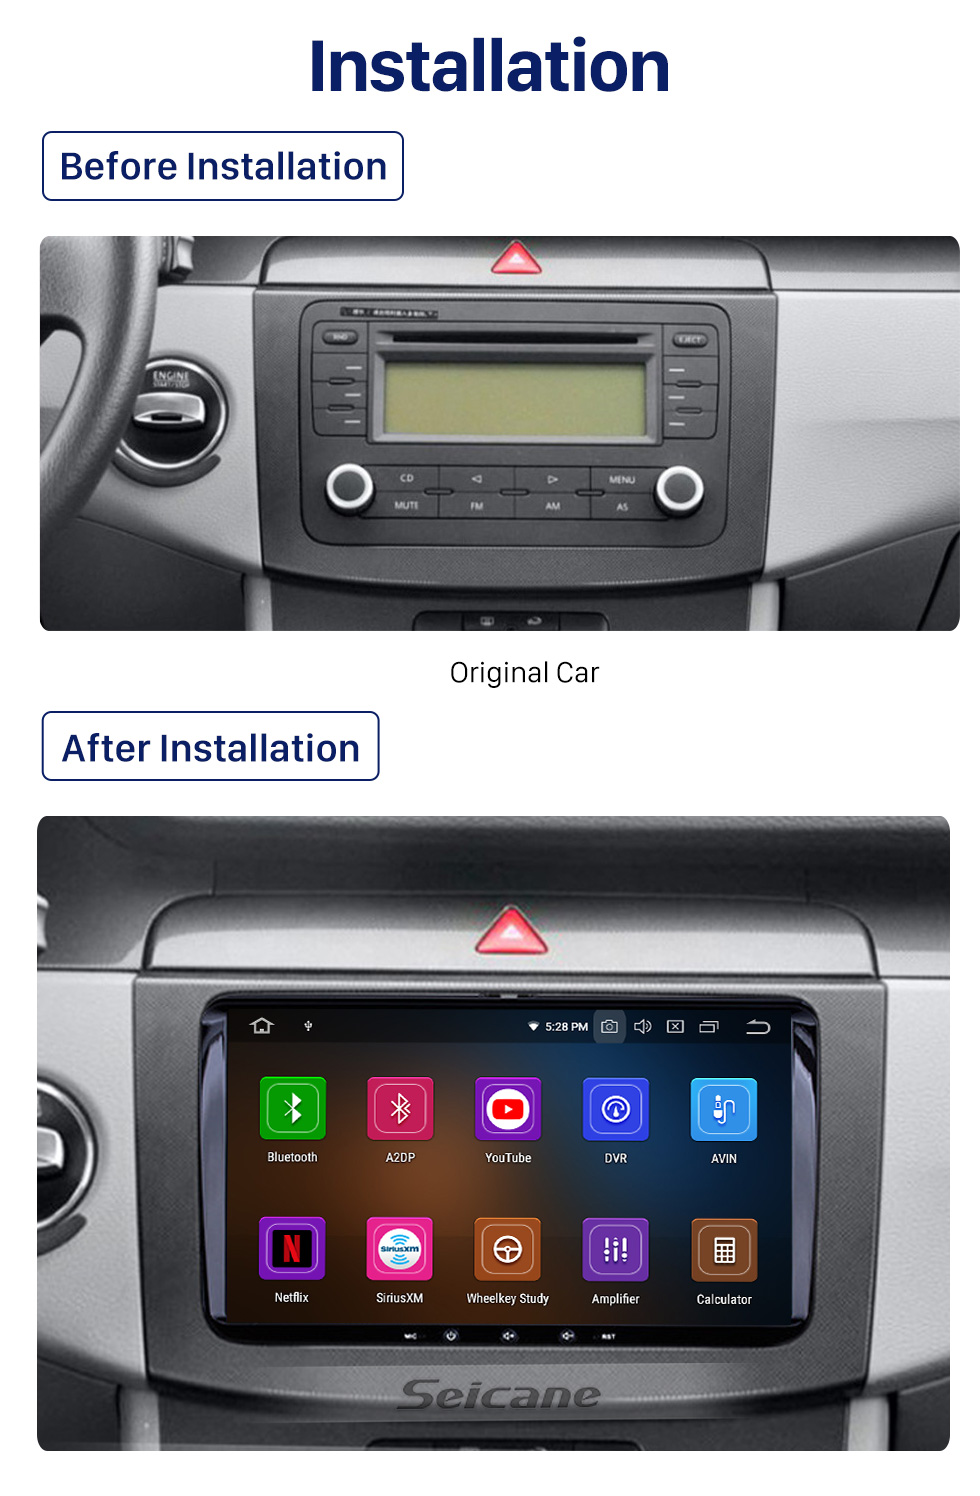 Seicane 9 inch Android 10.0 In Dash Bluetooth GPS System for VW Volkswagen Universal SKODA Seat with 3G WiFi Radio RDS Mirror Link OBD2 Rearview Camera AUX